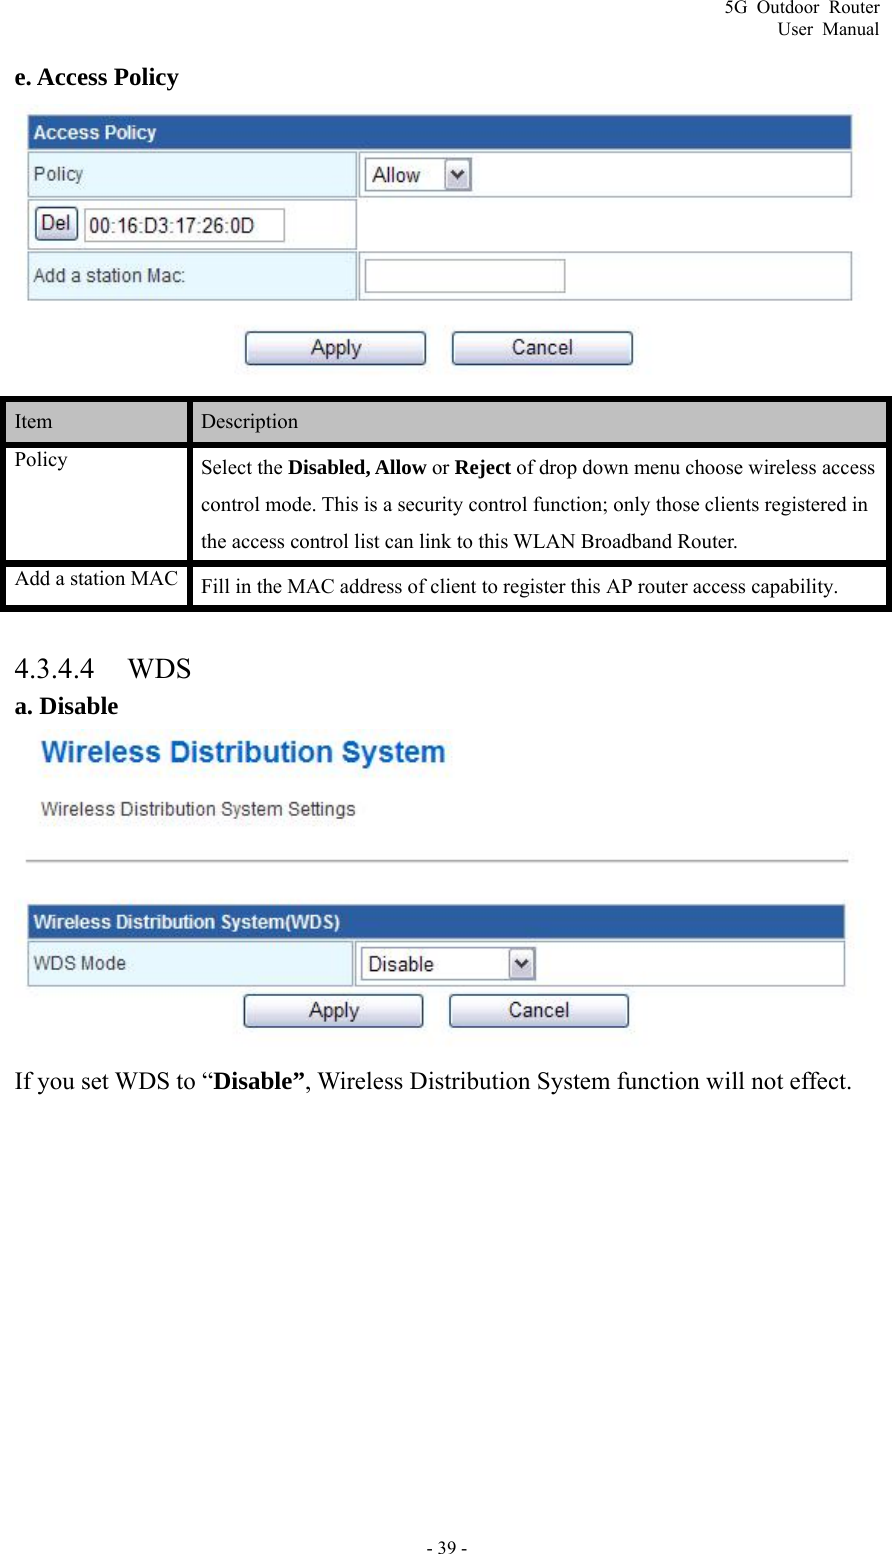 5G Outdoor Router User Manual - 39 - e. Access Policy  Item   Description  Policy Select the Disabled, Allow or Reject of drop down menu choose wireless access control mode. This is a security control function; only those clients registered in the access control list can link to this WLAN Broadband Router. Add a station MAC  Fill in the MAC address of client to register this AP router access capability.  4.3.4.4 WDS a. Disable  If you set WDS to “Disable”, Wireless Distribution System function will not effect.  